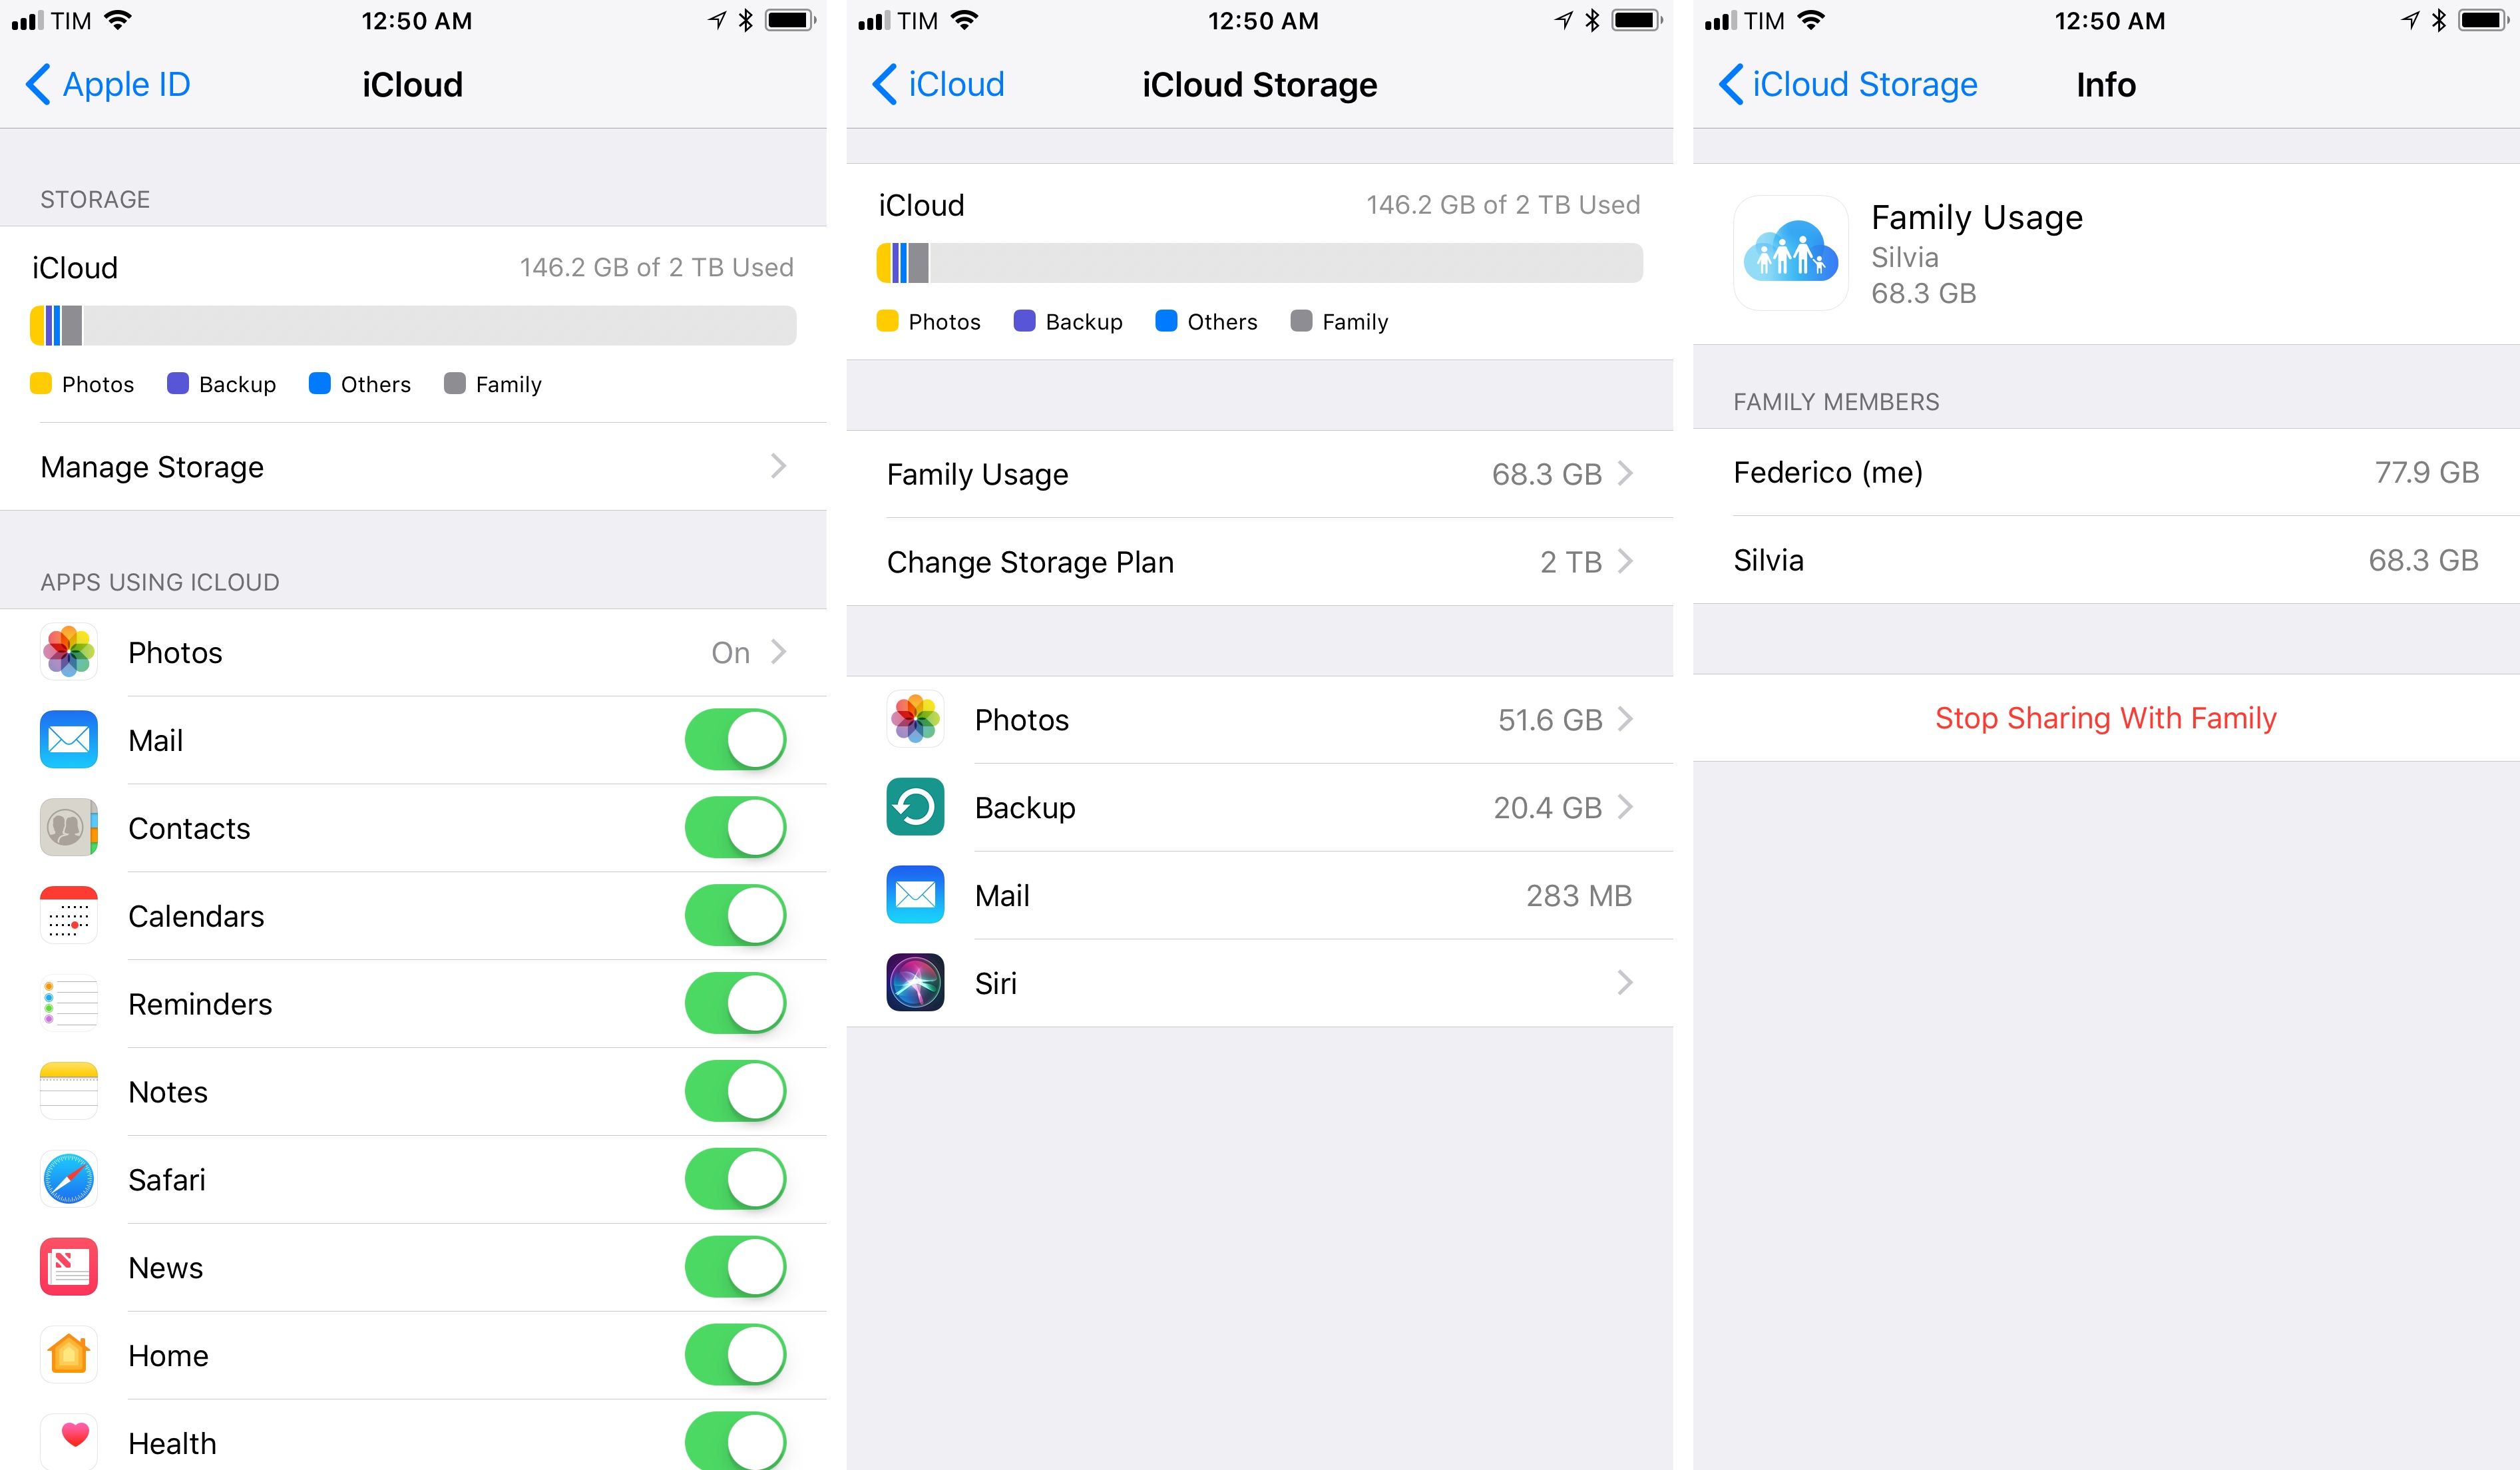 Storage settings for a shared iCloud plan.